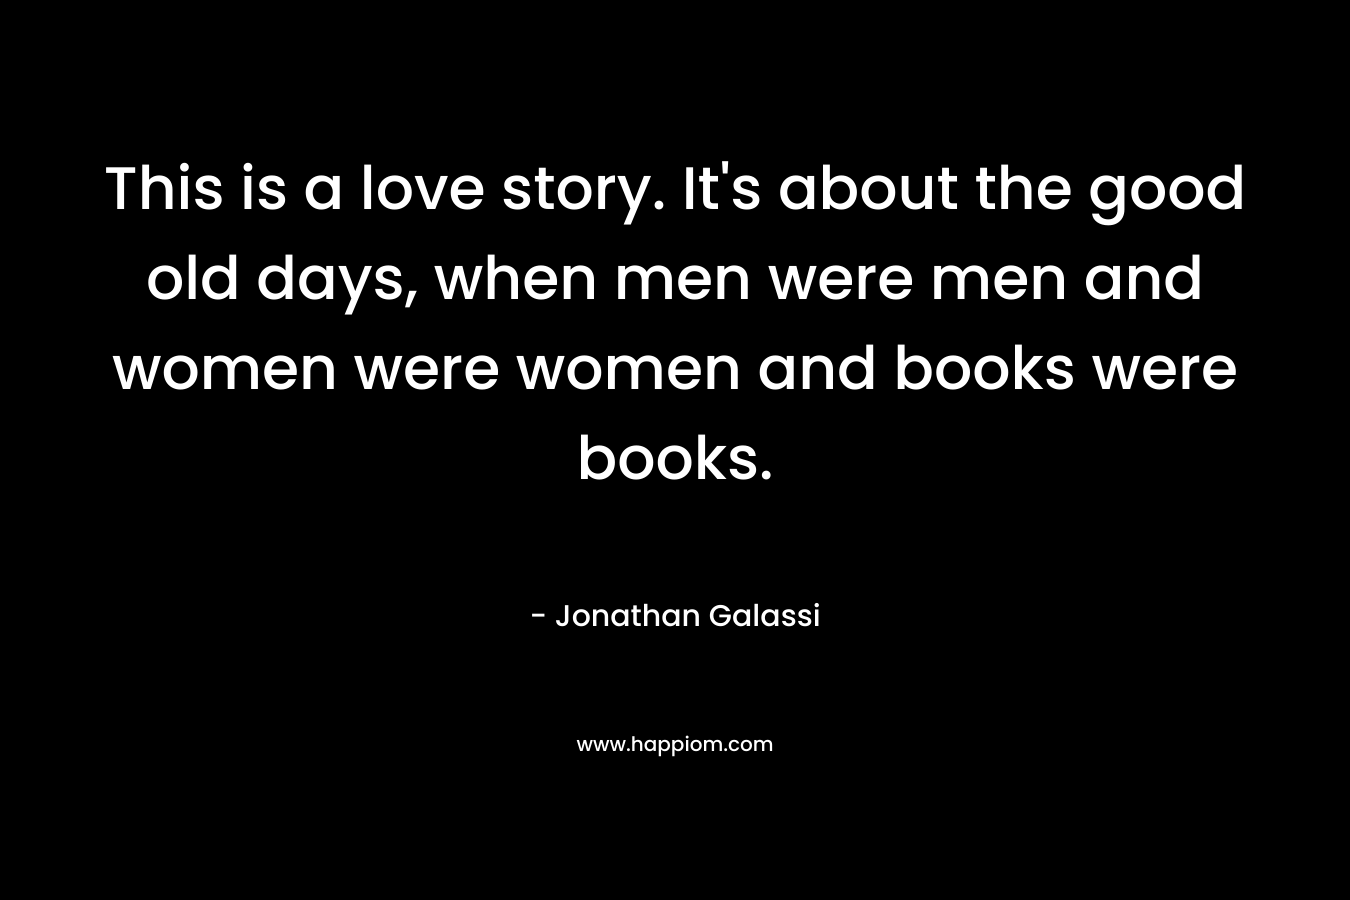 This is a love story. It’s about the good old days, when men were men and women were women and books were books. – Jonathan Galassi